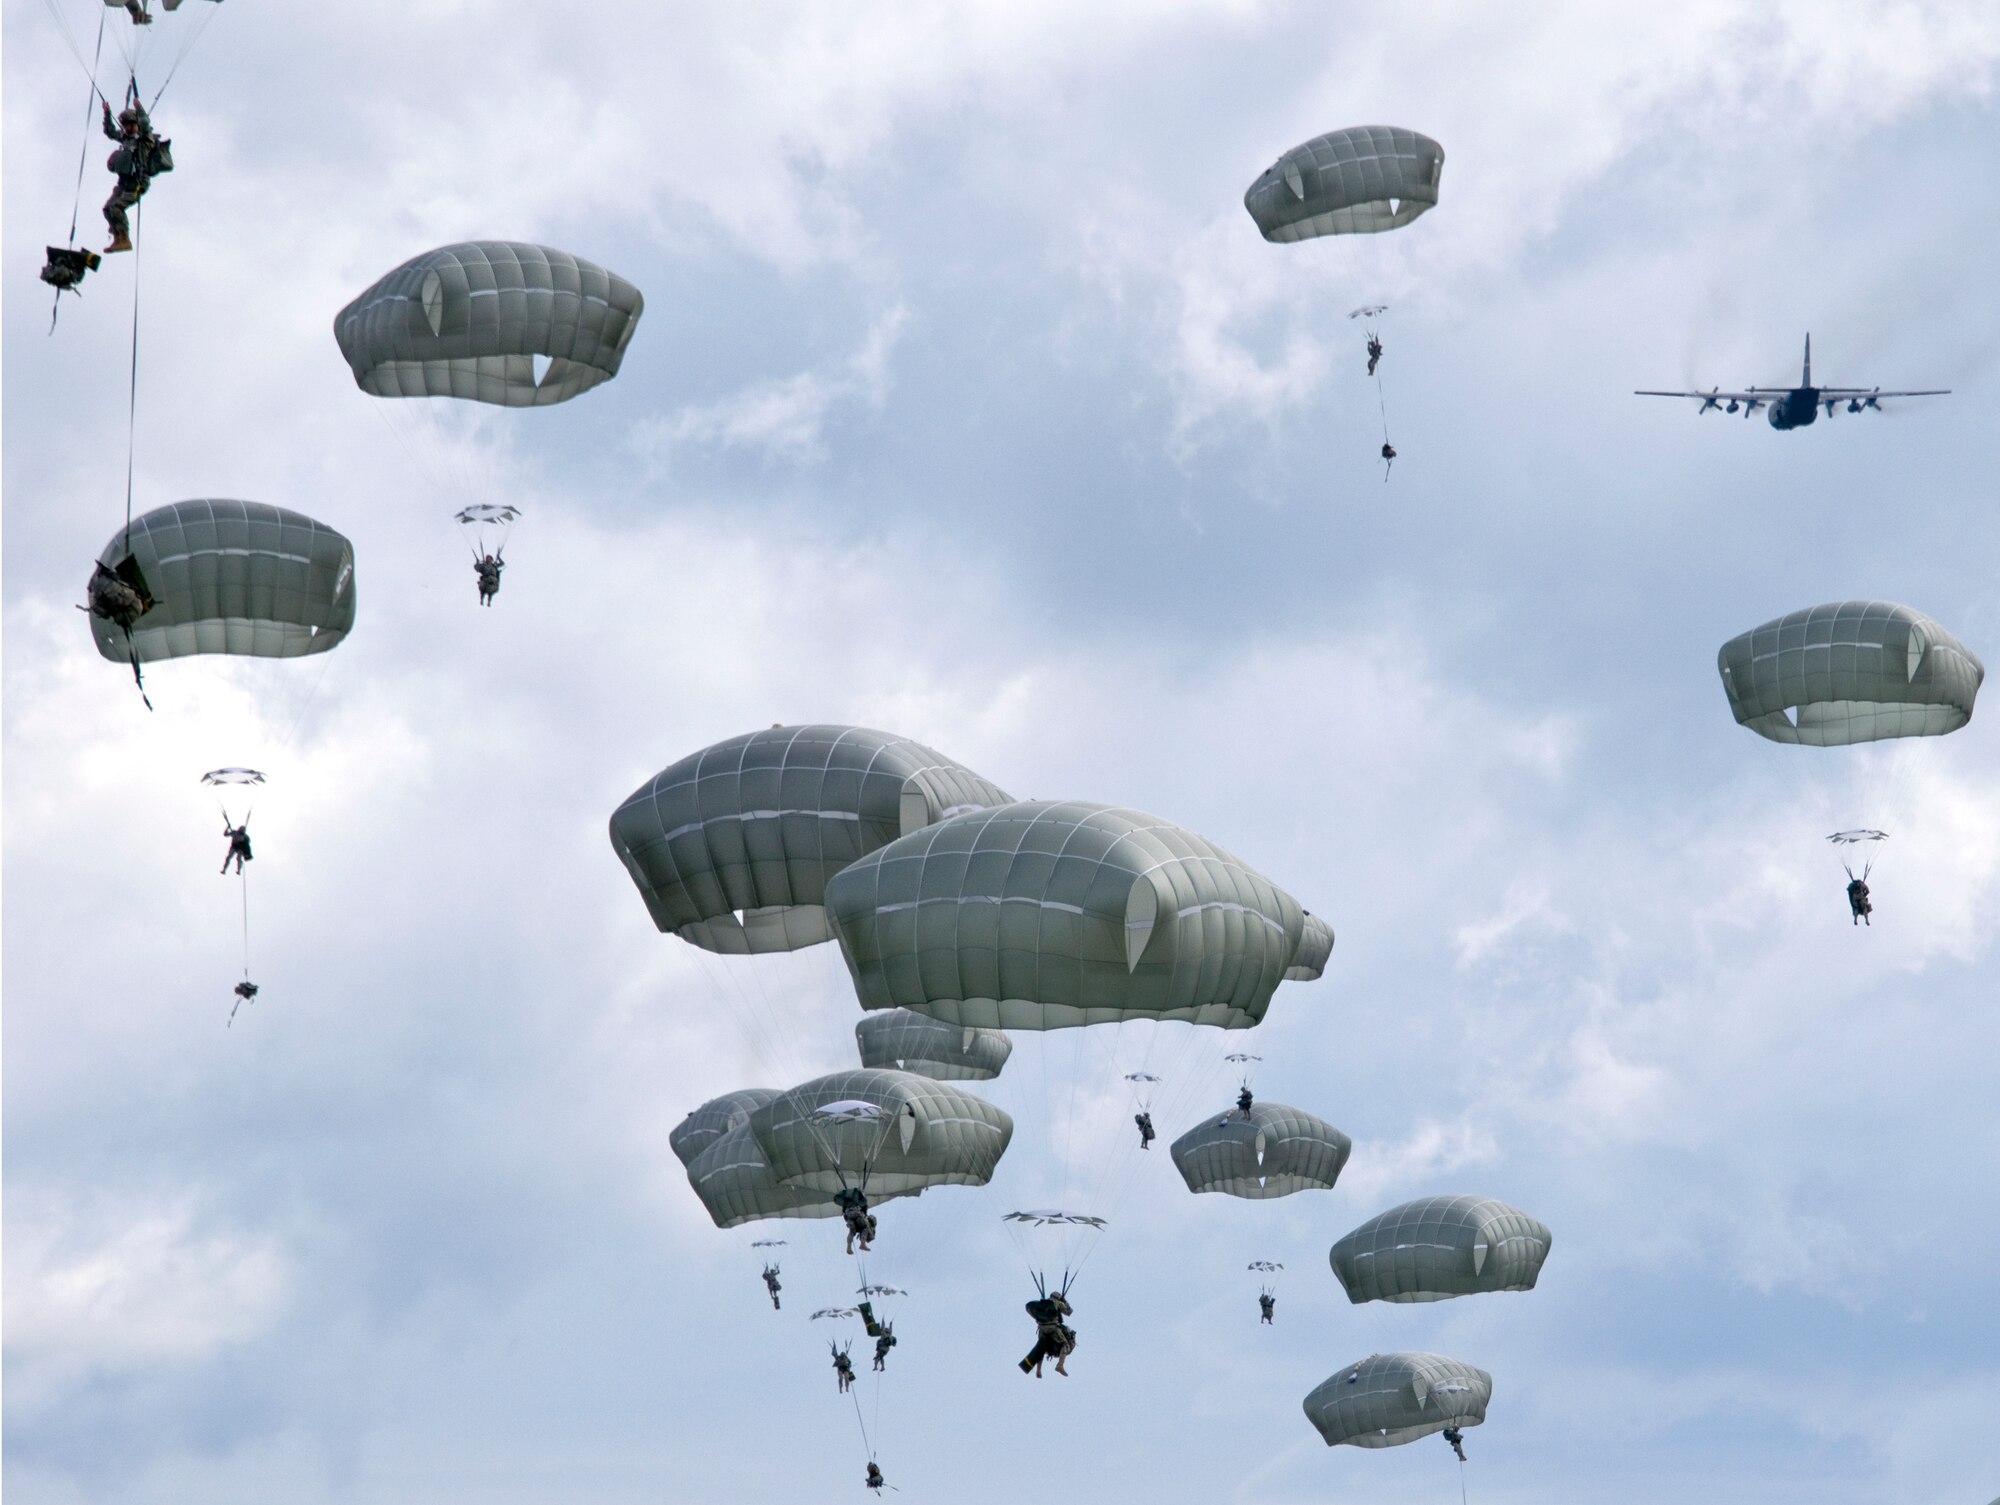 Paratroopers with the 4th Infantry Brigade Combat Team (Airborne), 25th Infantry Division jump from an Alaska Air National Guard C-130 Hercules here as part of a Joint Force Entry Exercise on June 7, 2014. The six-day exercise involved more than 1,500 personnel including active duty Army, Air Force and Air National Guard. (U.S. Air National Guard Photo by Capt. John Callahan)